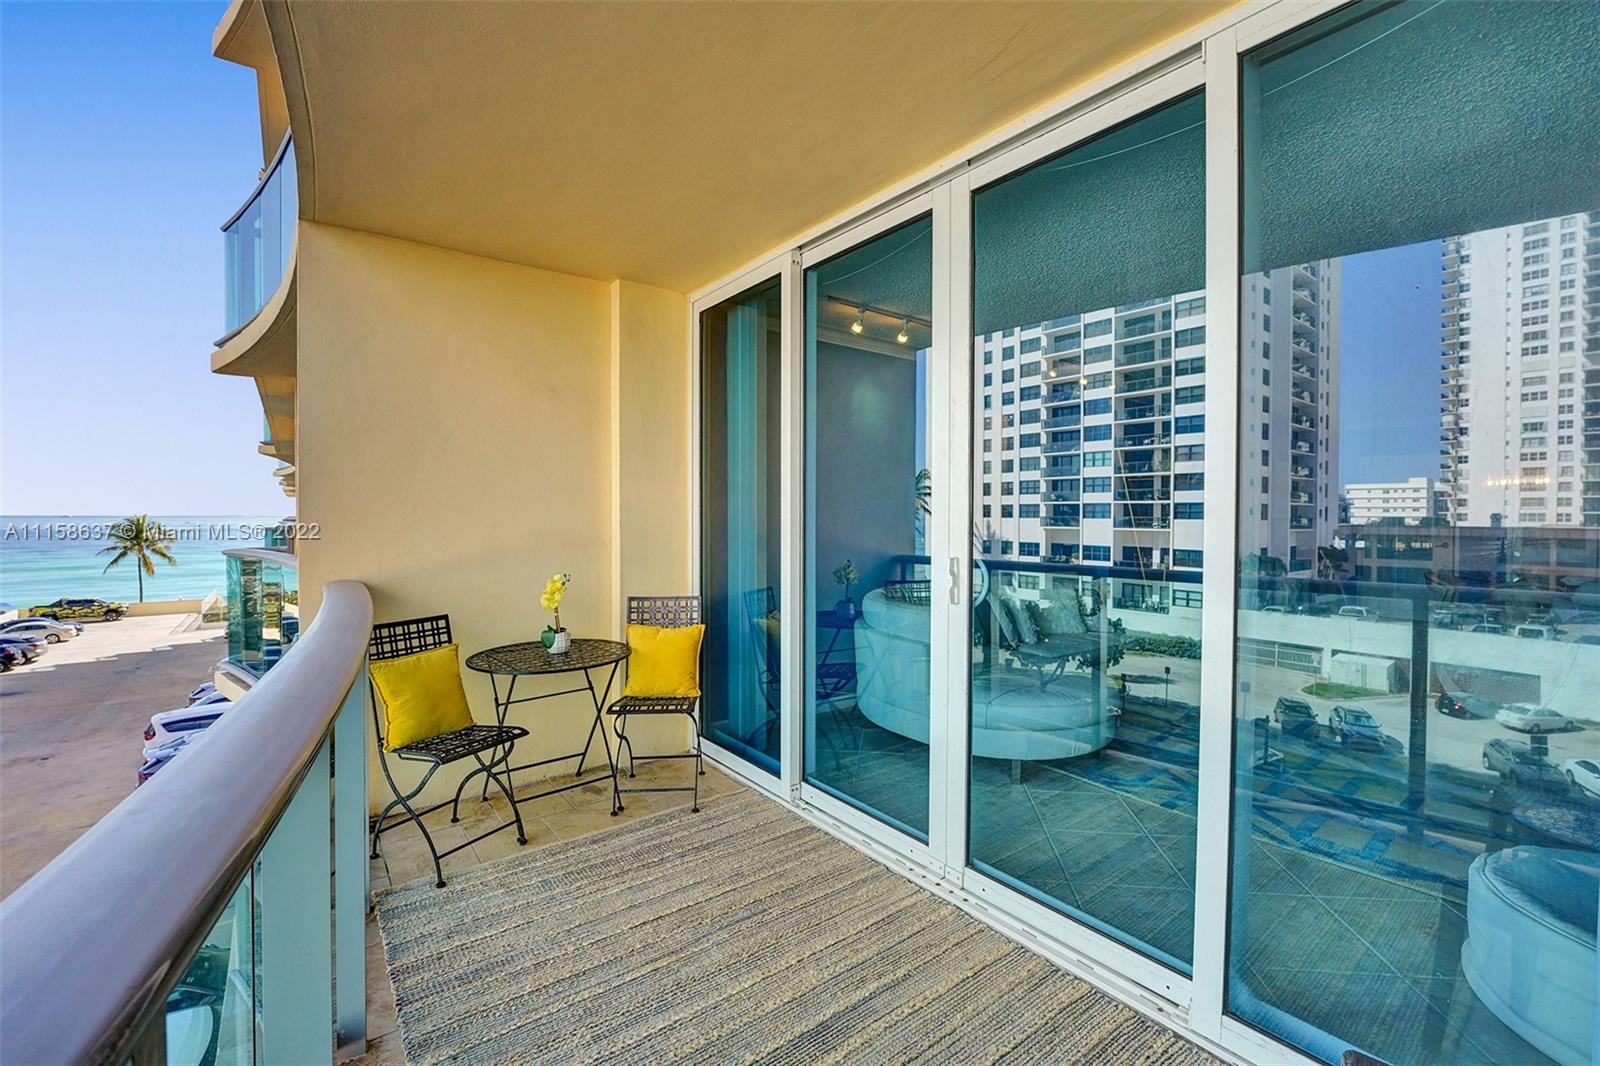 Photo 1 of Wave Condo Apt 401 (available 03-10) in Hollywood - MLS A11158637